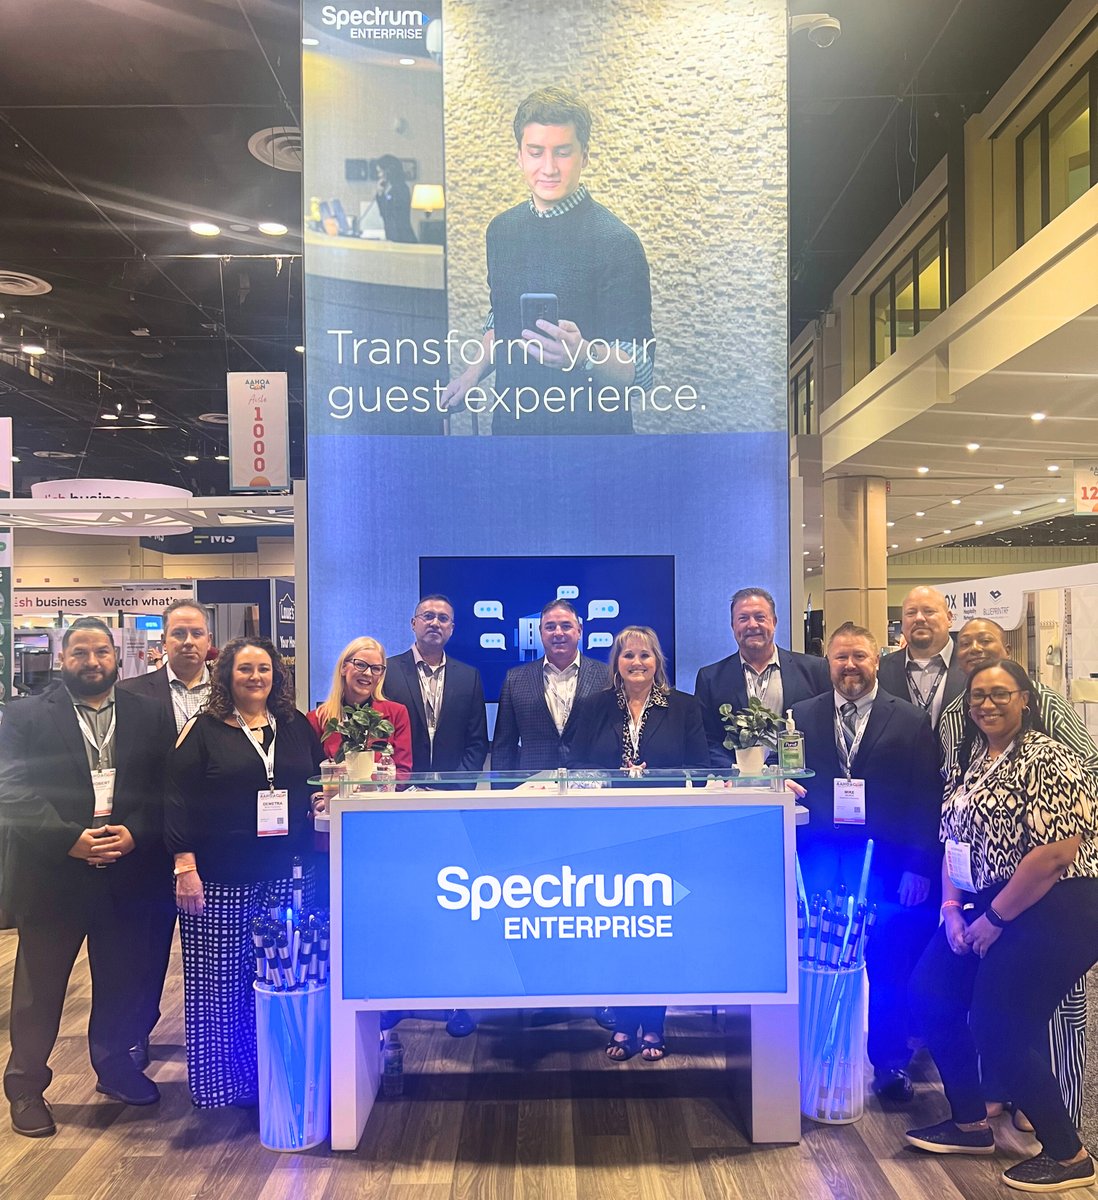 We’re in Orlando this week for #AAHOACON24! If you’re at the show stop by booth 1009 to discuss how you can modernize and simplify your hotel technology through in-room entertainment, personalized services and always-on connectivity across your property. enterprise.spectrum.com/landing/hsp/aa…